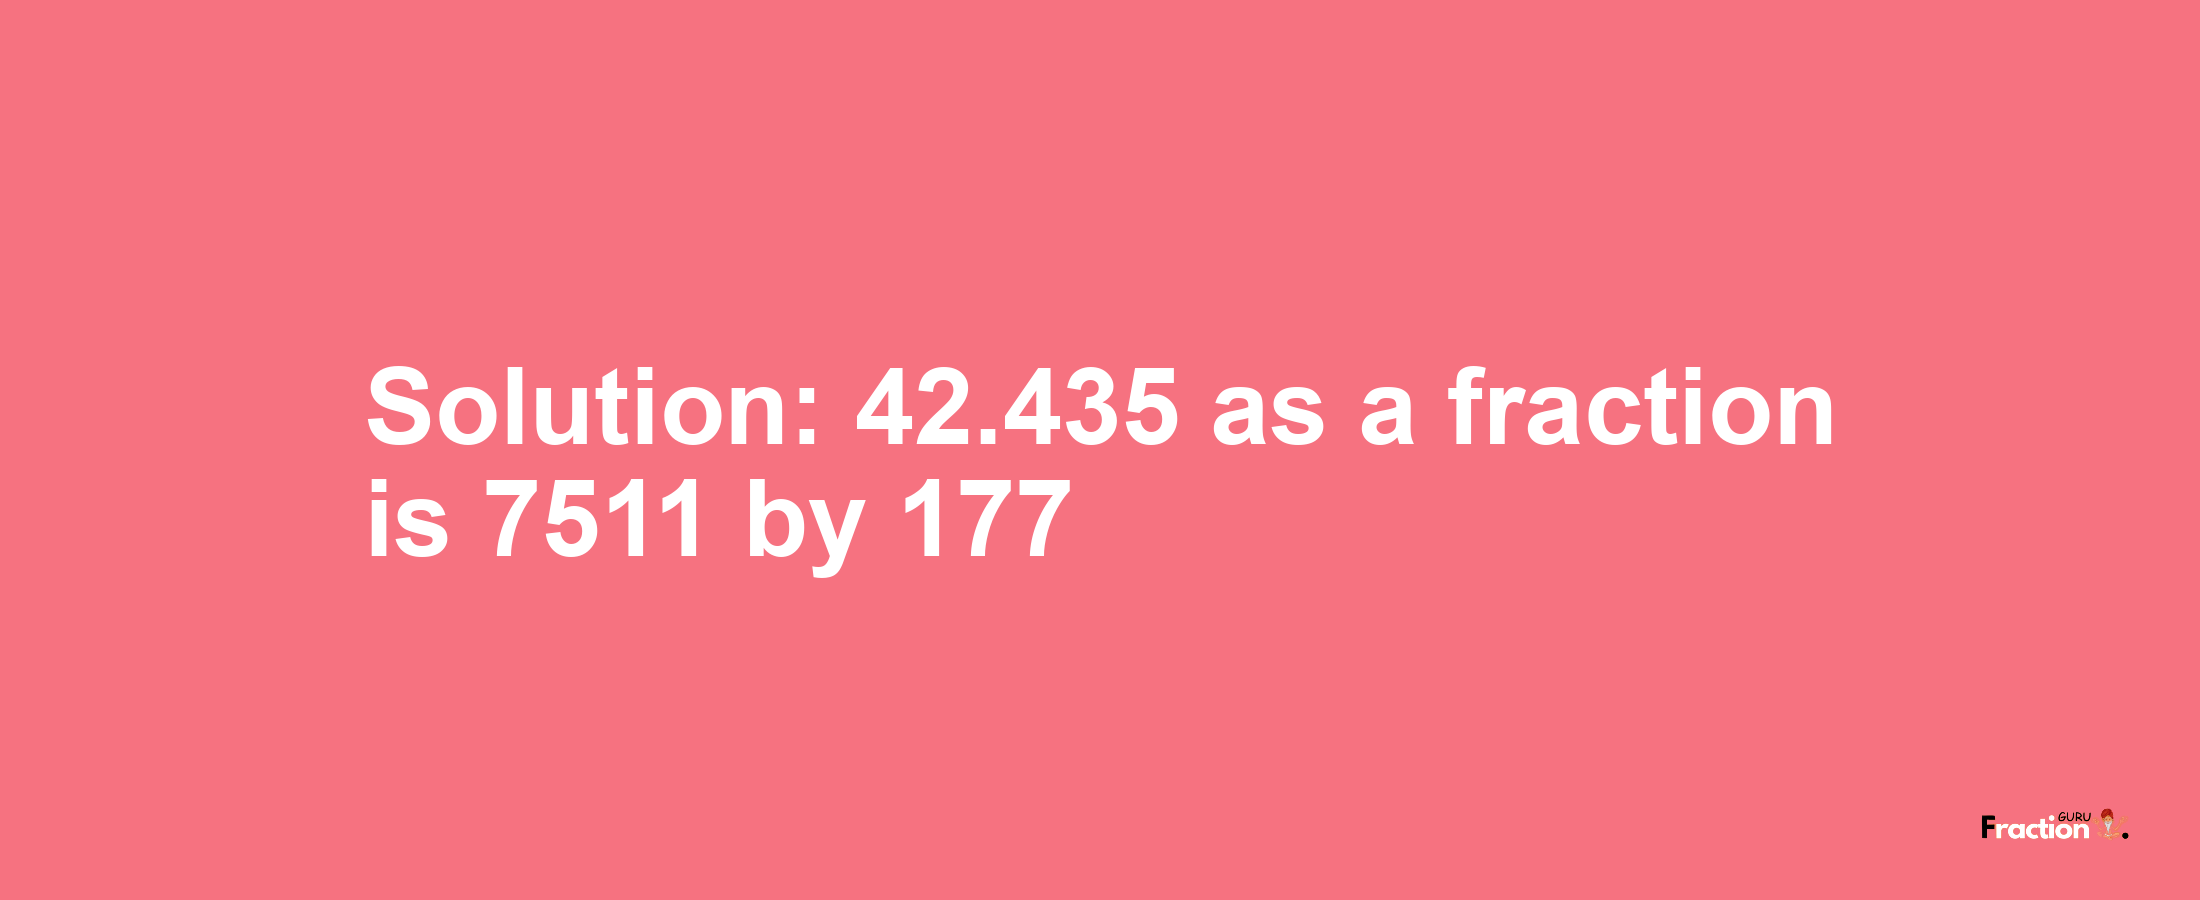 Solution:42.435 as a fraction is 7511/177